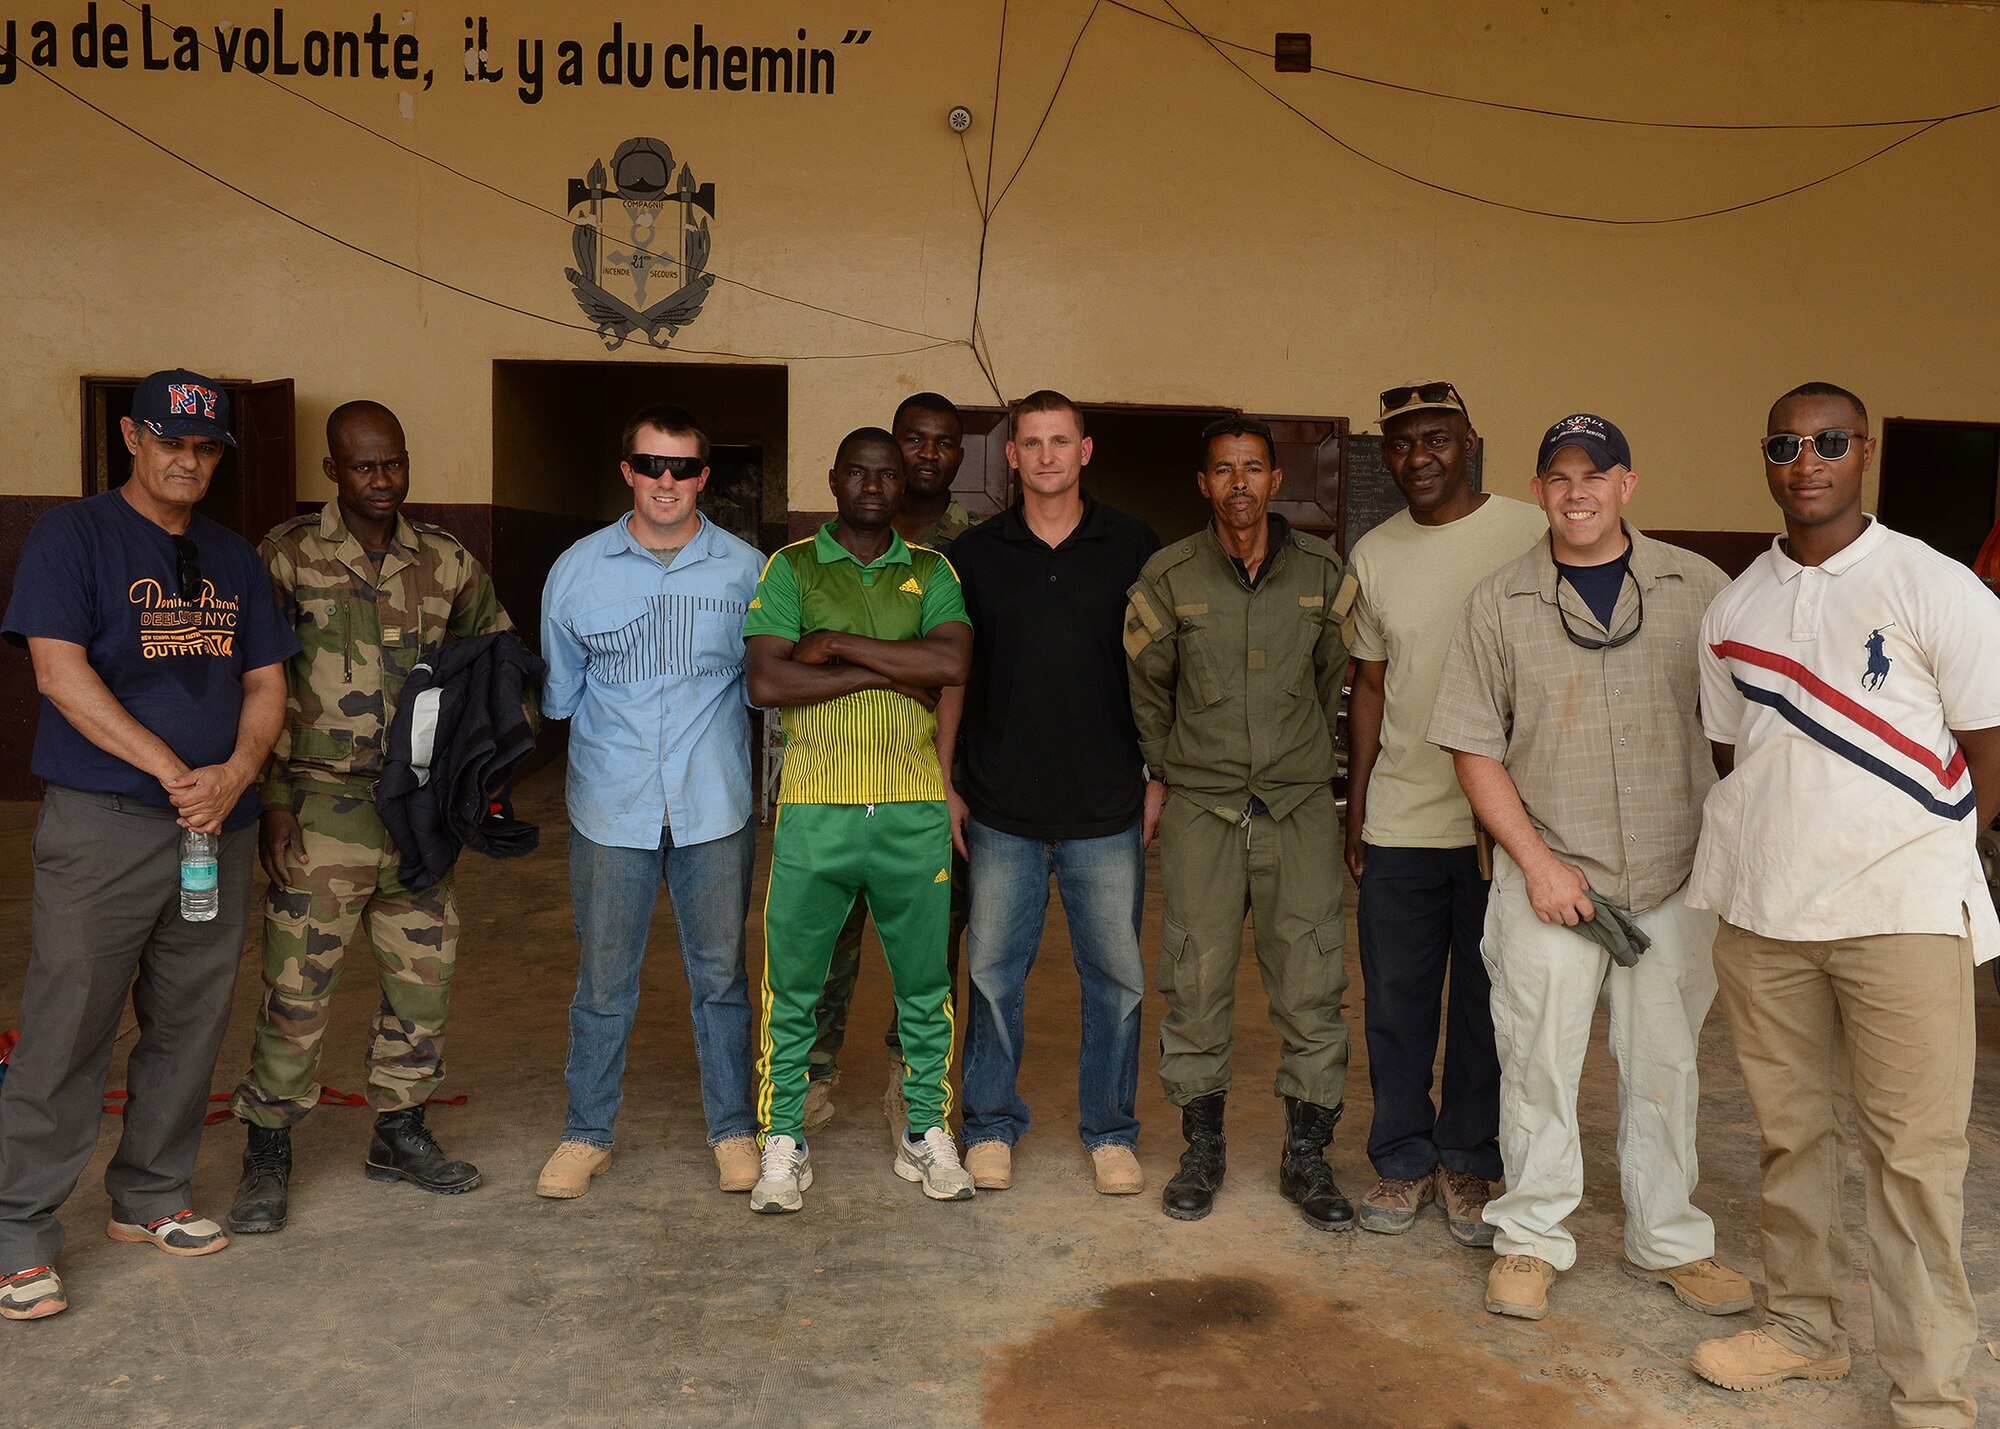 Airmen deployed to 724th Expeditionary Air Base Squadron and members of the Forces Armées Nigeriennes pose for a photo in Agadez, Niger, May 16, 2017. Firefighters from the 724th EABS visited the FAN’s fire department for a joint knowledge exchange to help continue building partnerships. (U.S. Air Force photo by Senior Airman Jimmie D. Pike)